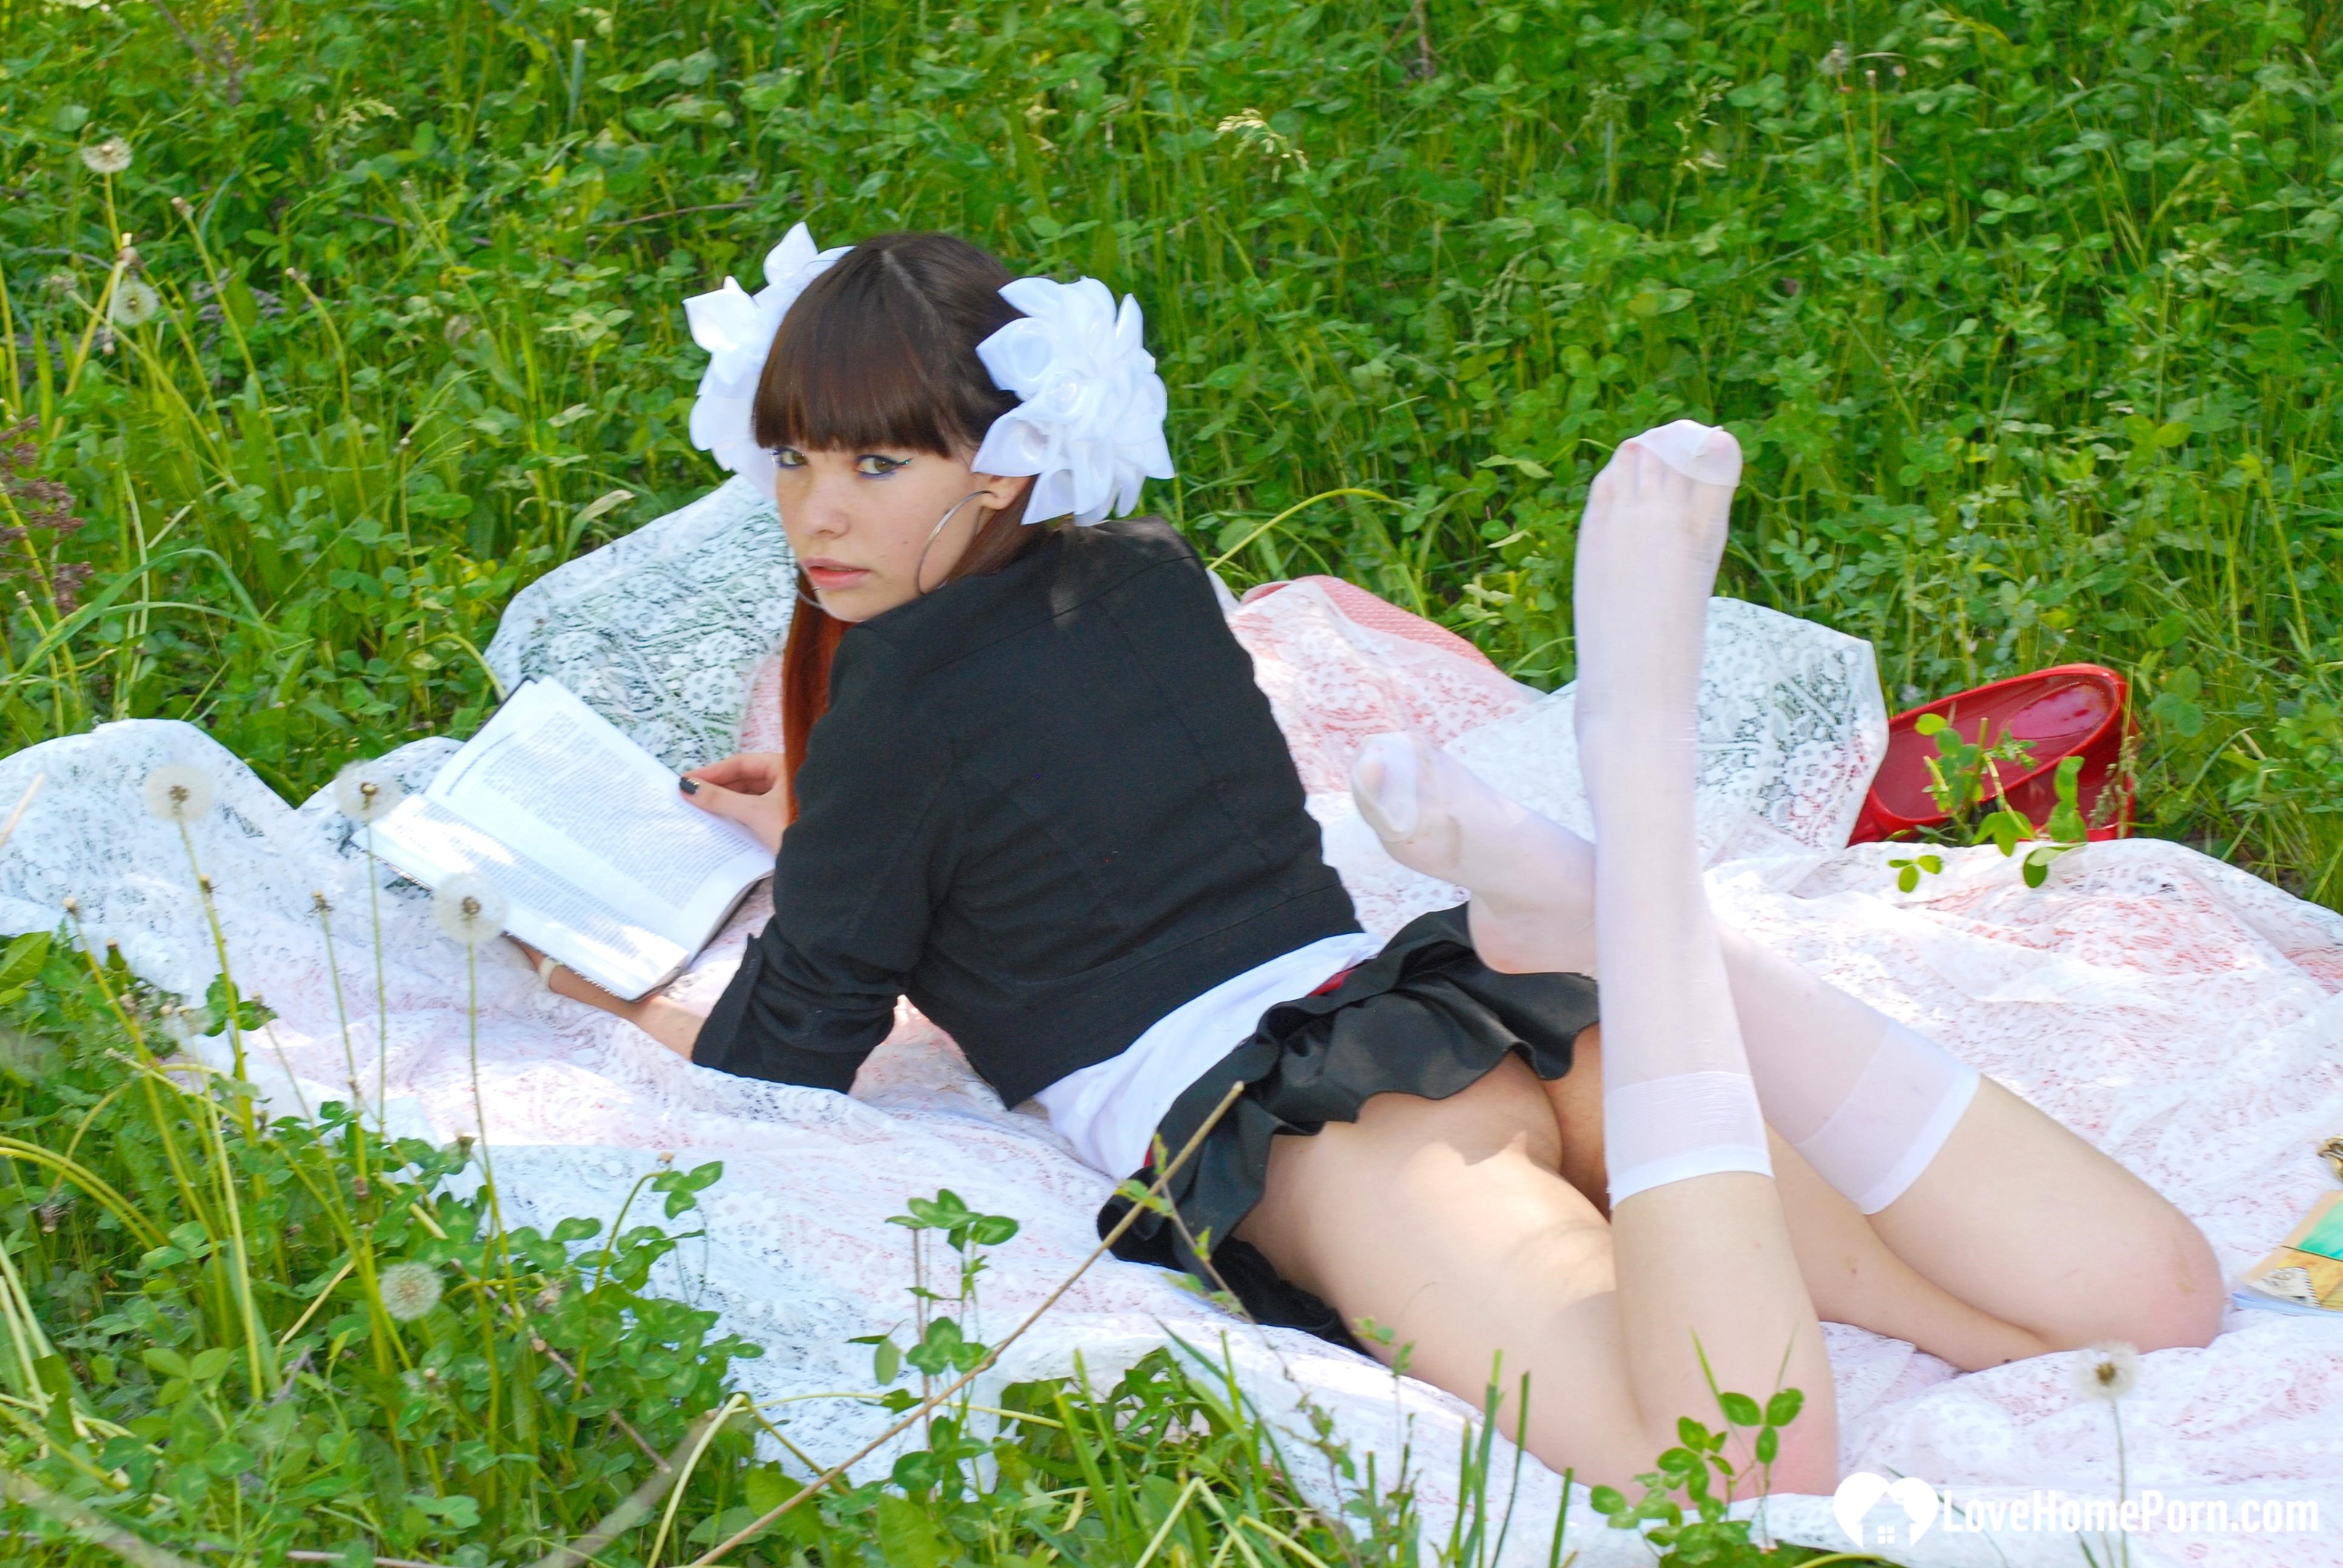 Schoolgirl turns a picnic into a teasing session